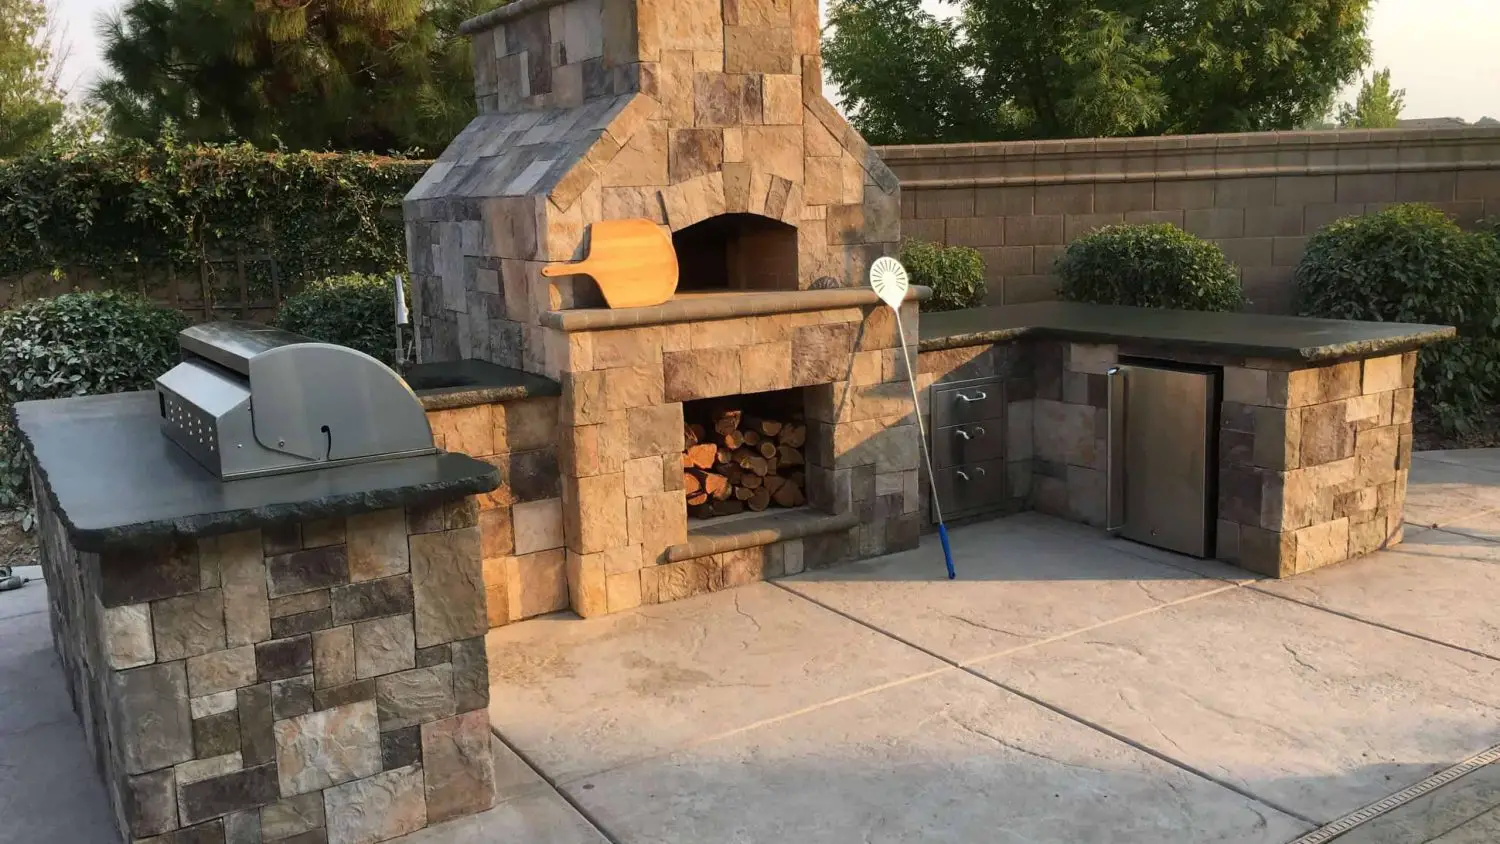 Best Outdoor Pizza Oven: Top 5 Models for Mouthwatering Pizza